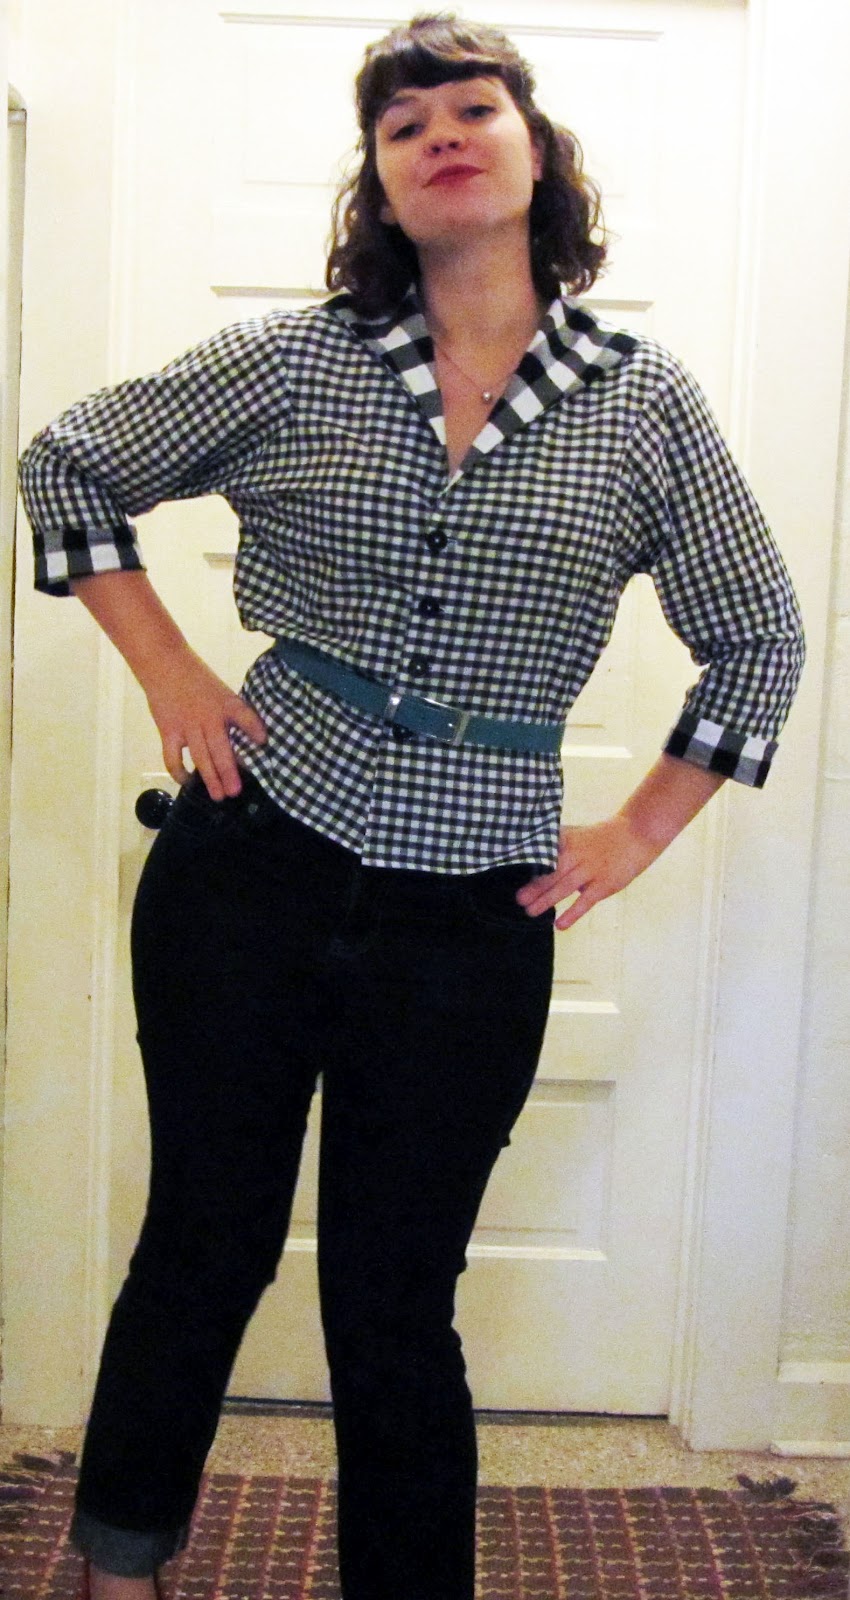 Errant Pear: Finished gingham blouse